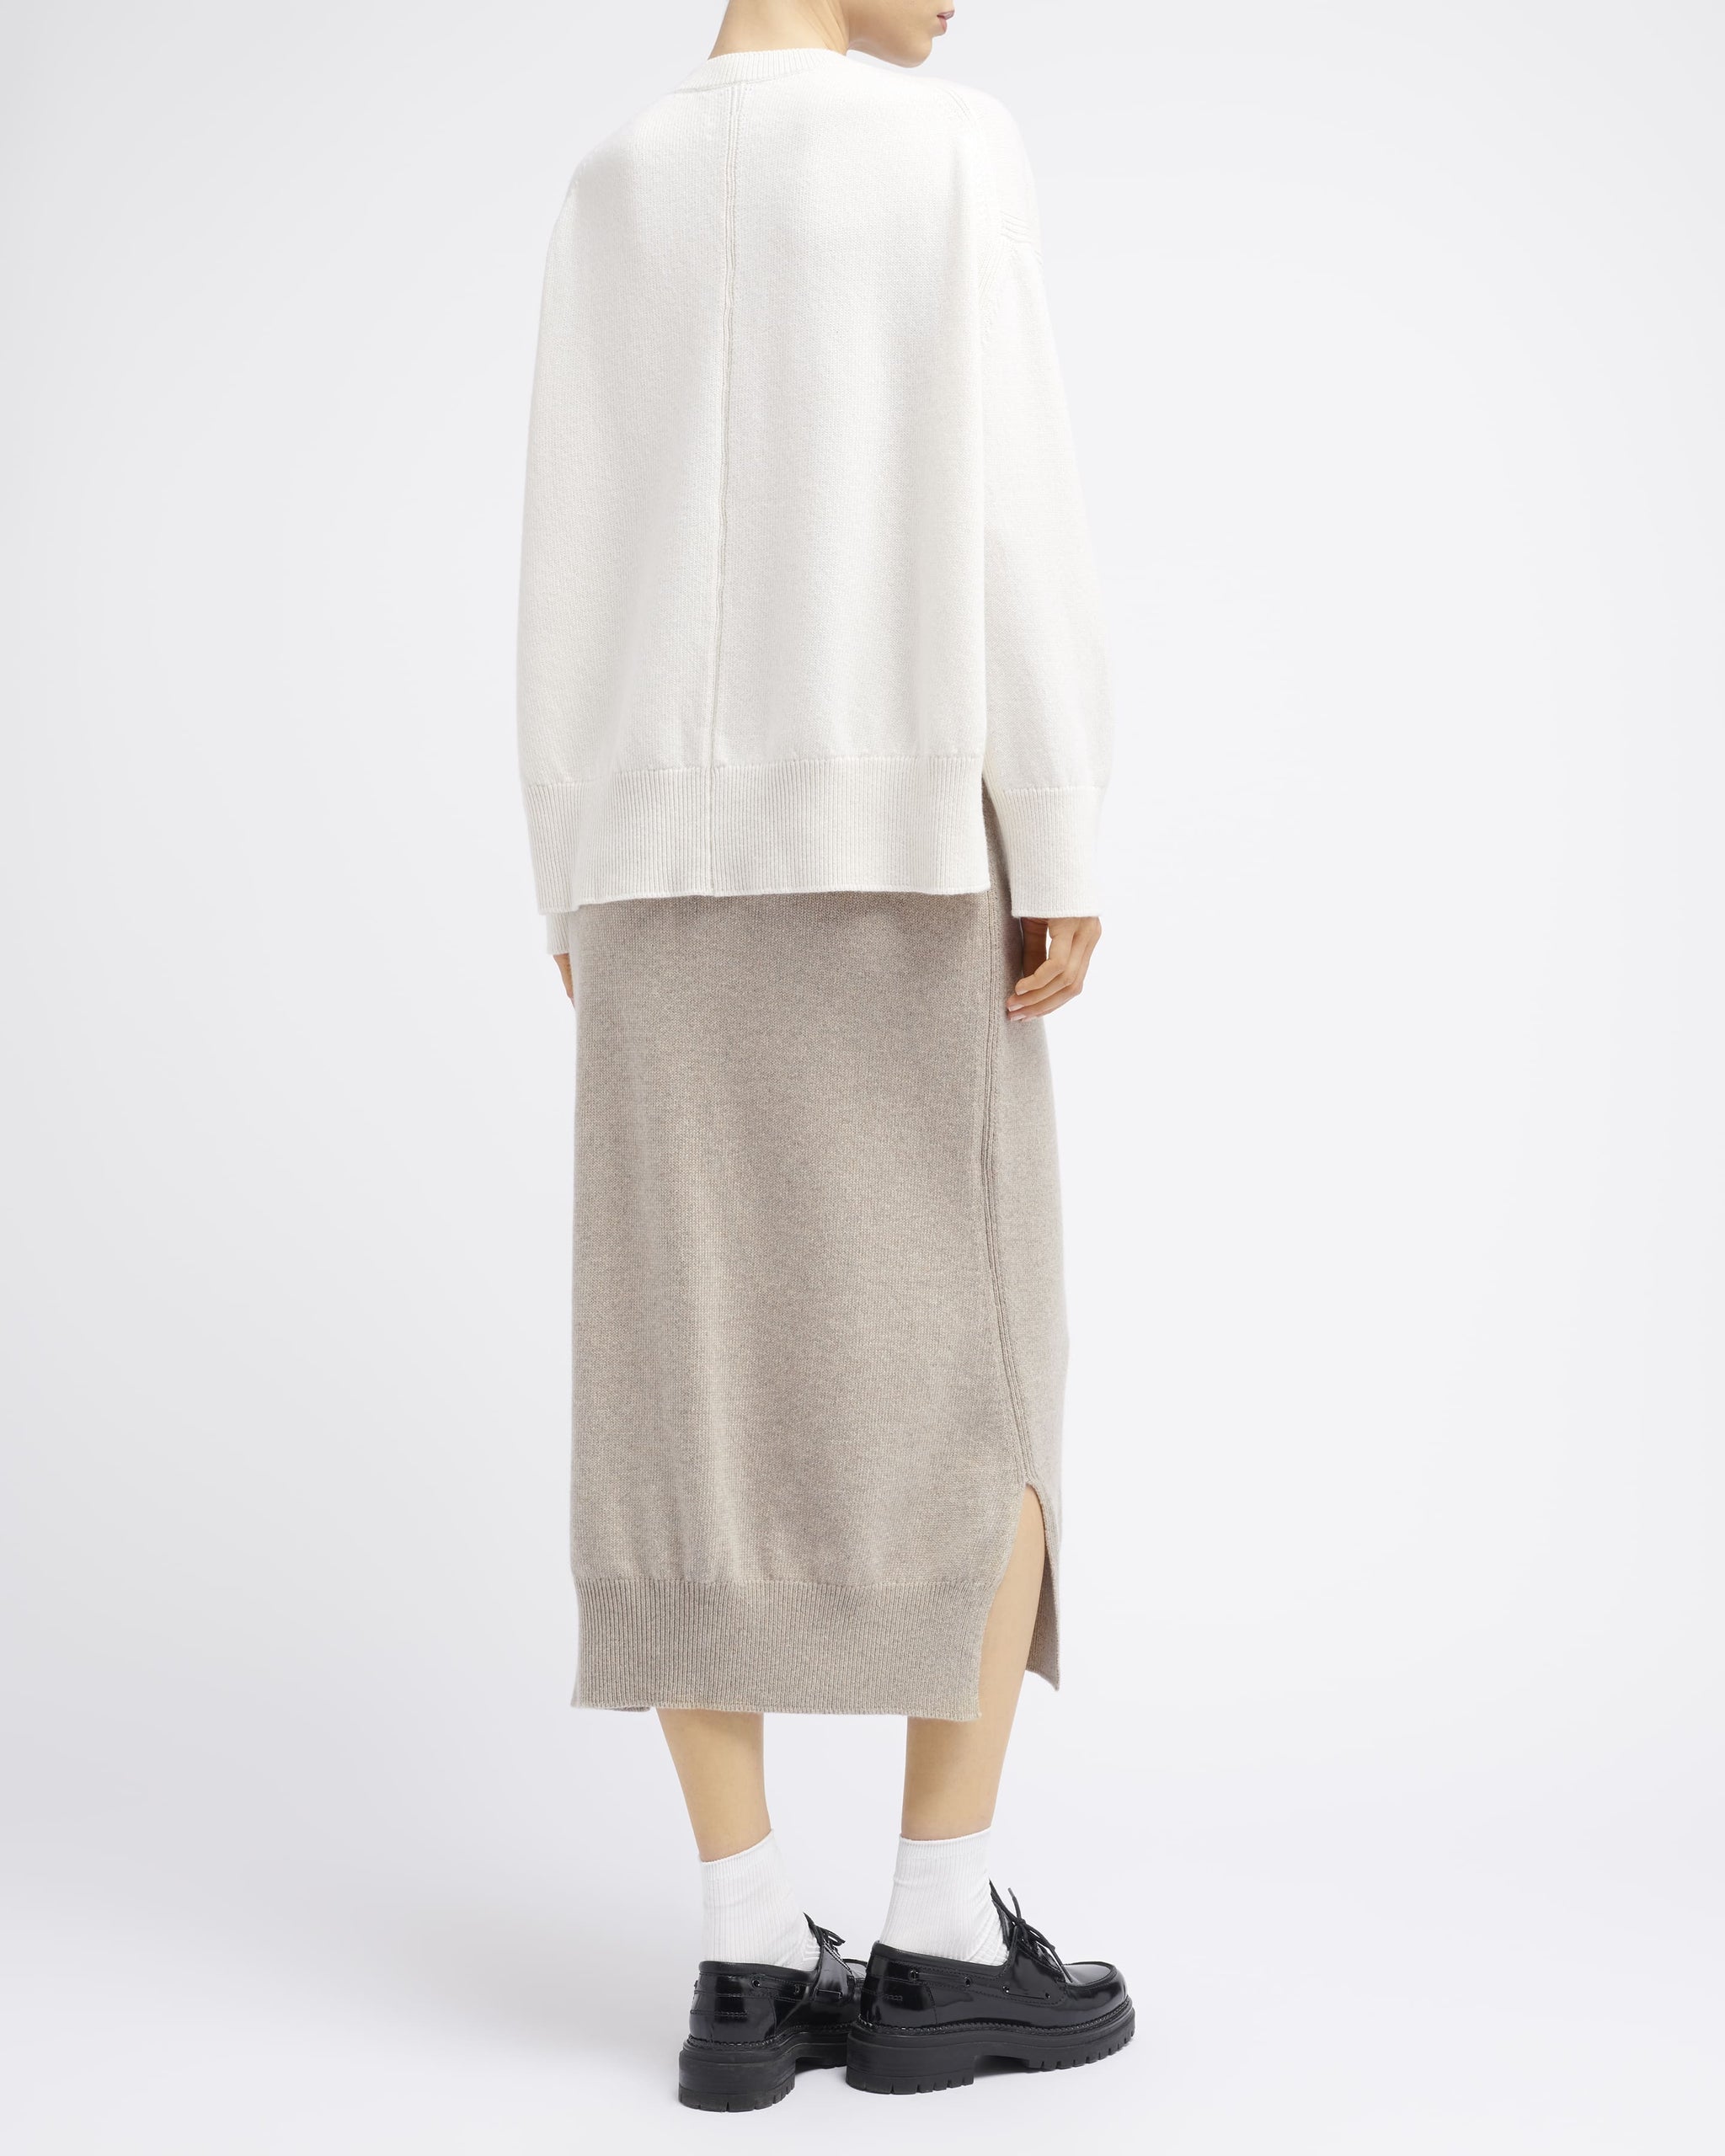 Col rond oversize cachemire